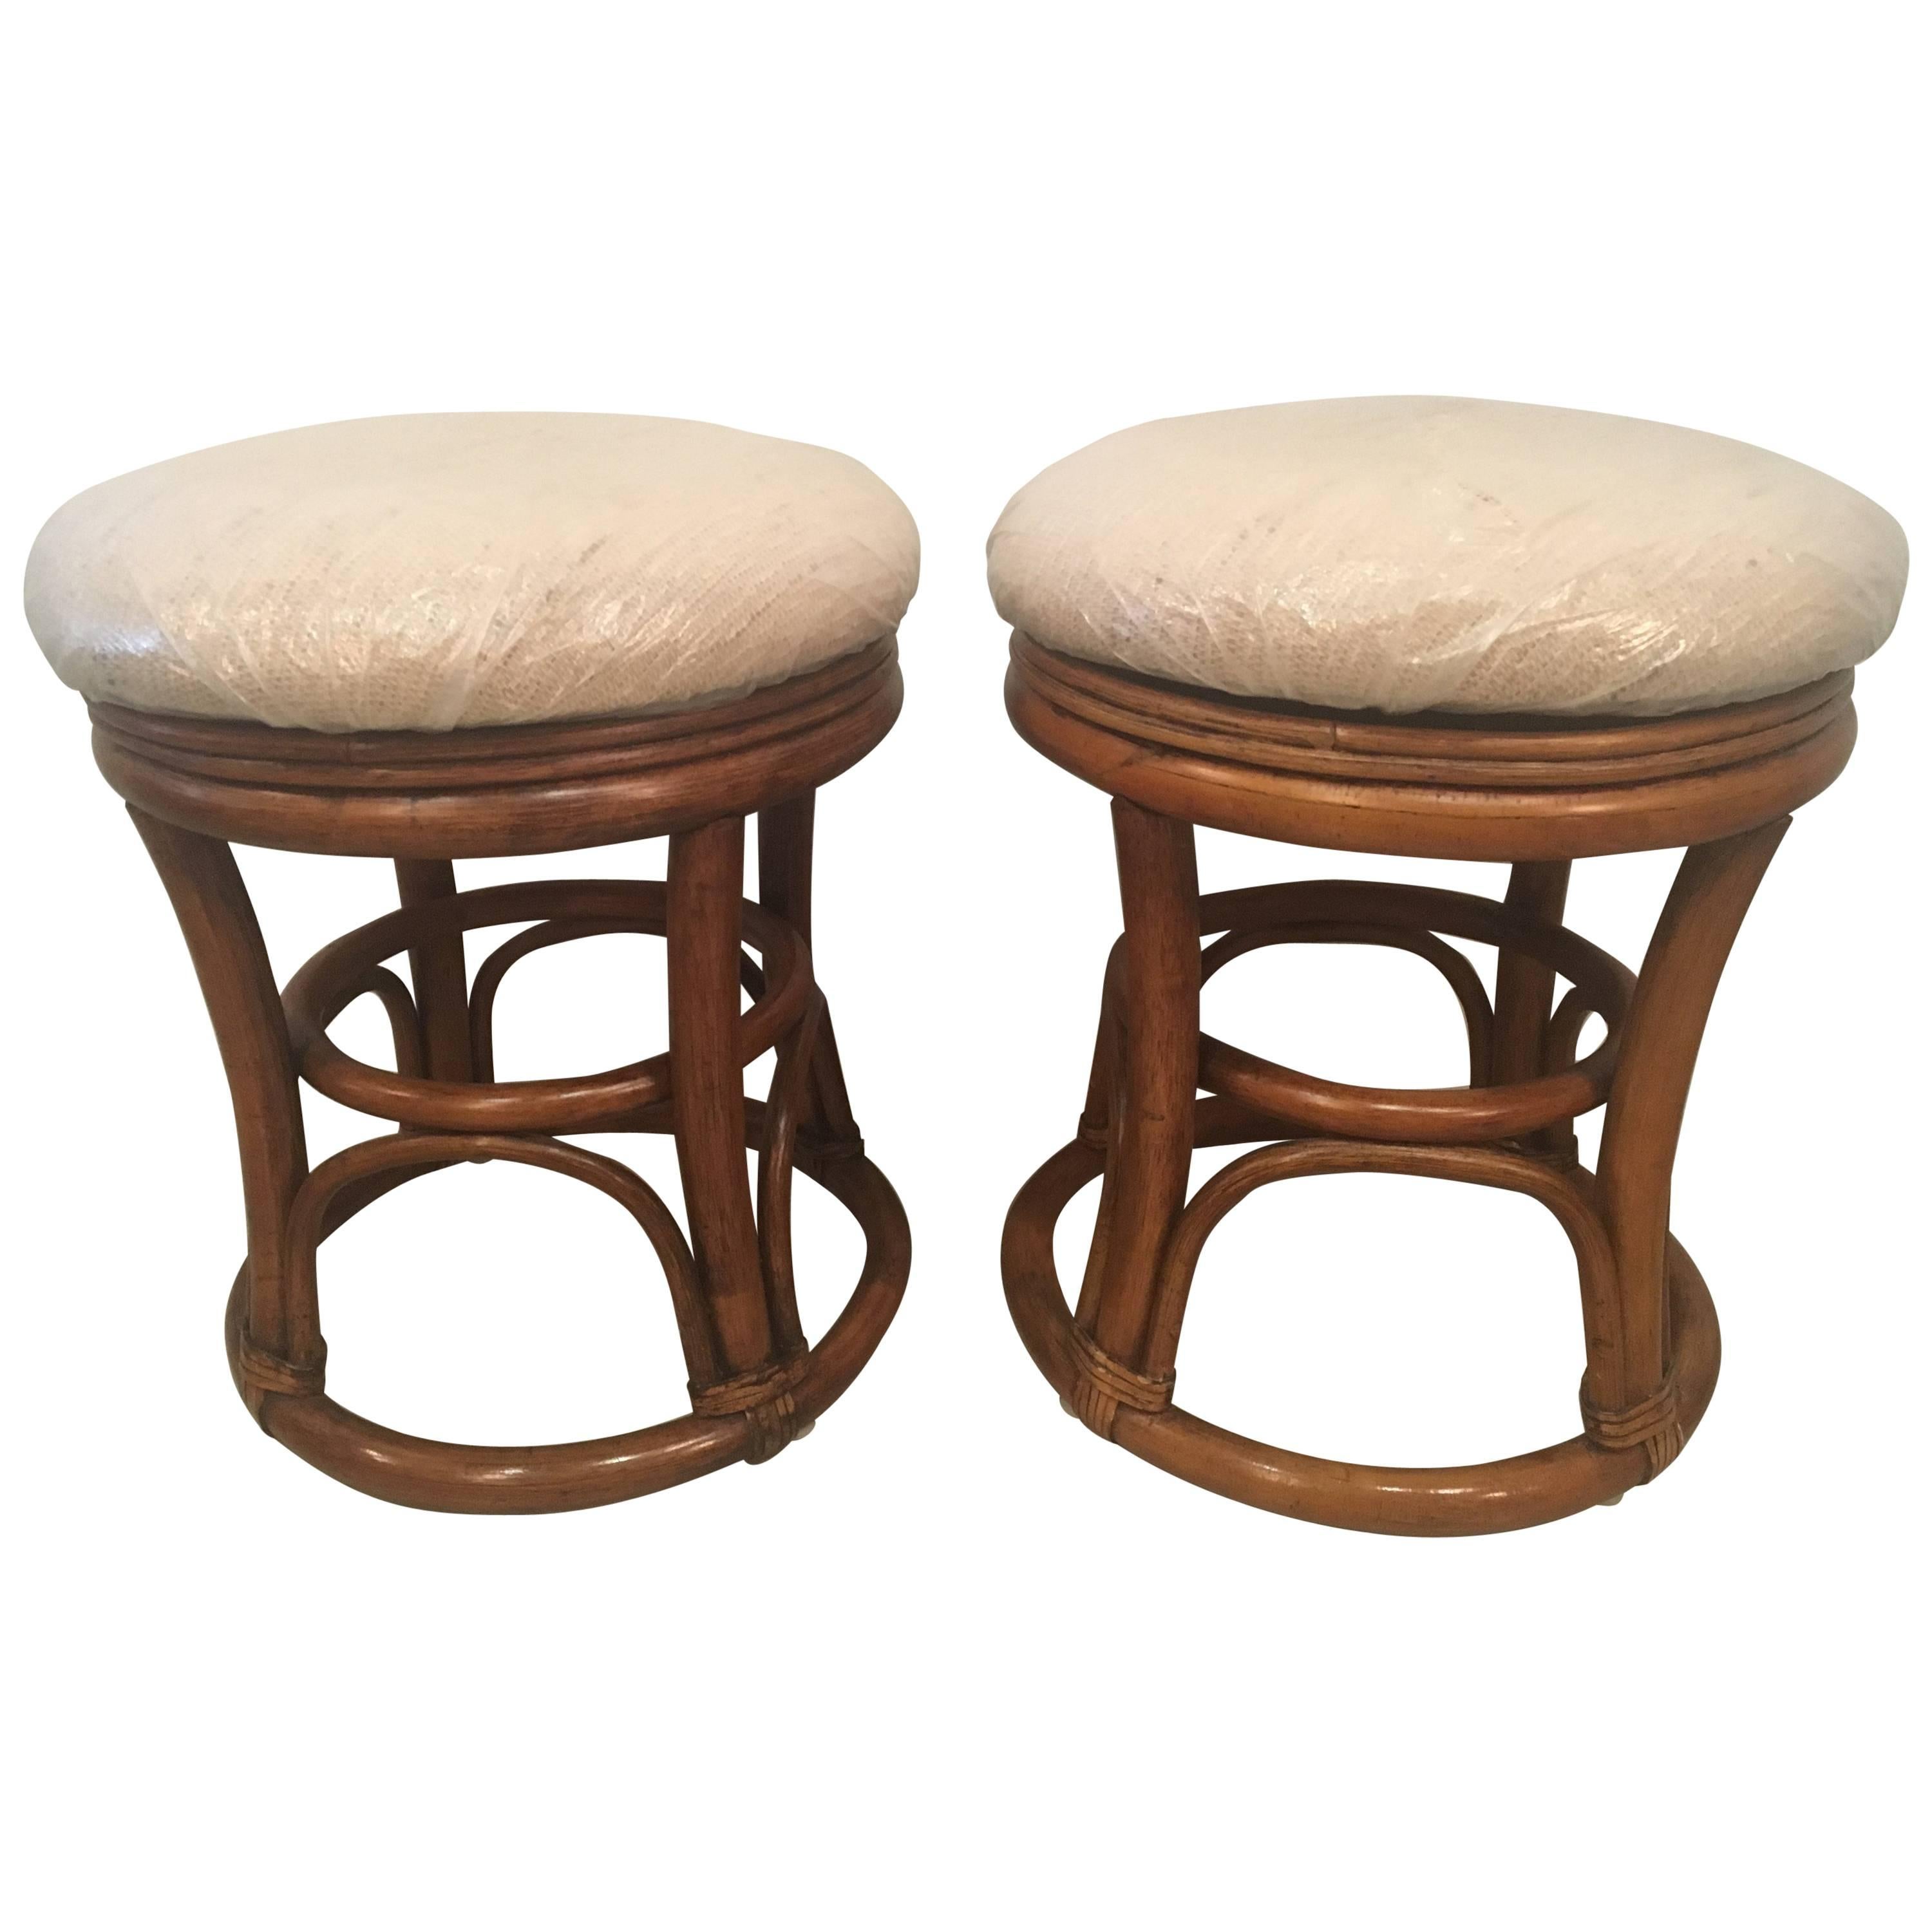 Pair of Vintage Rattan Stools Benches Tropical Palm Beach